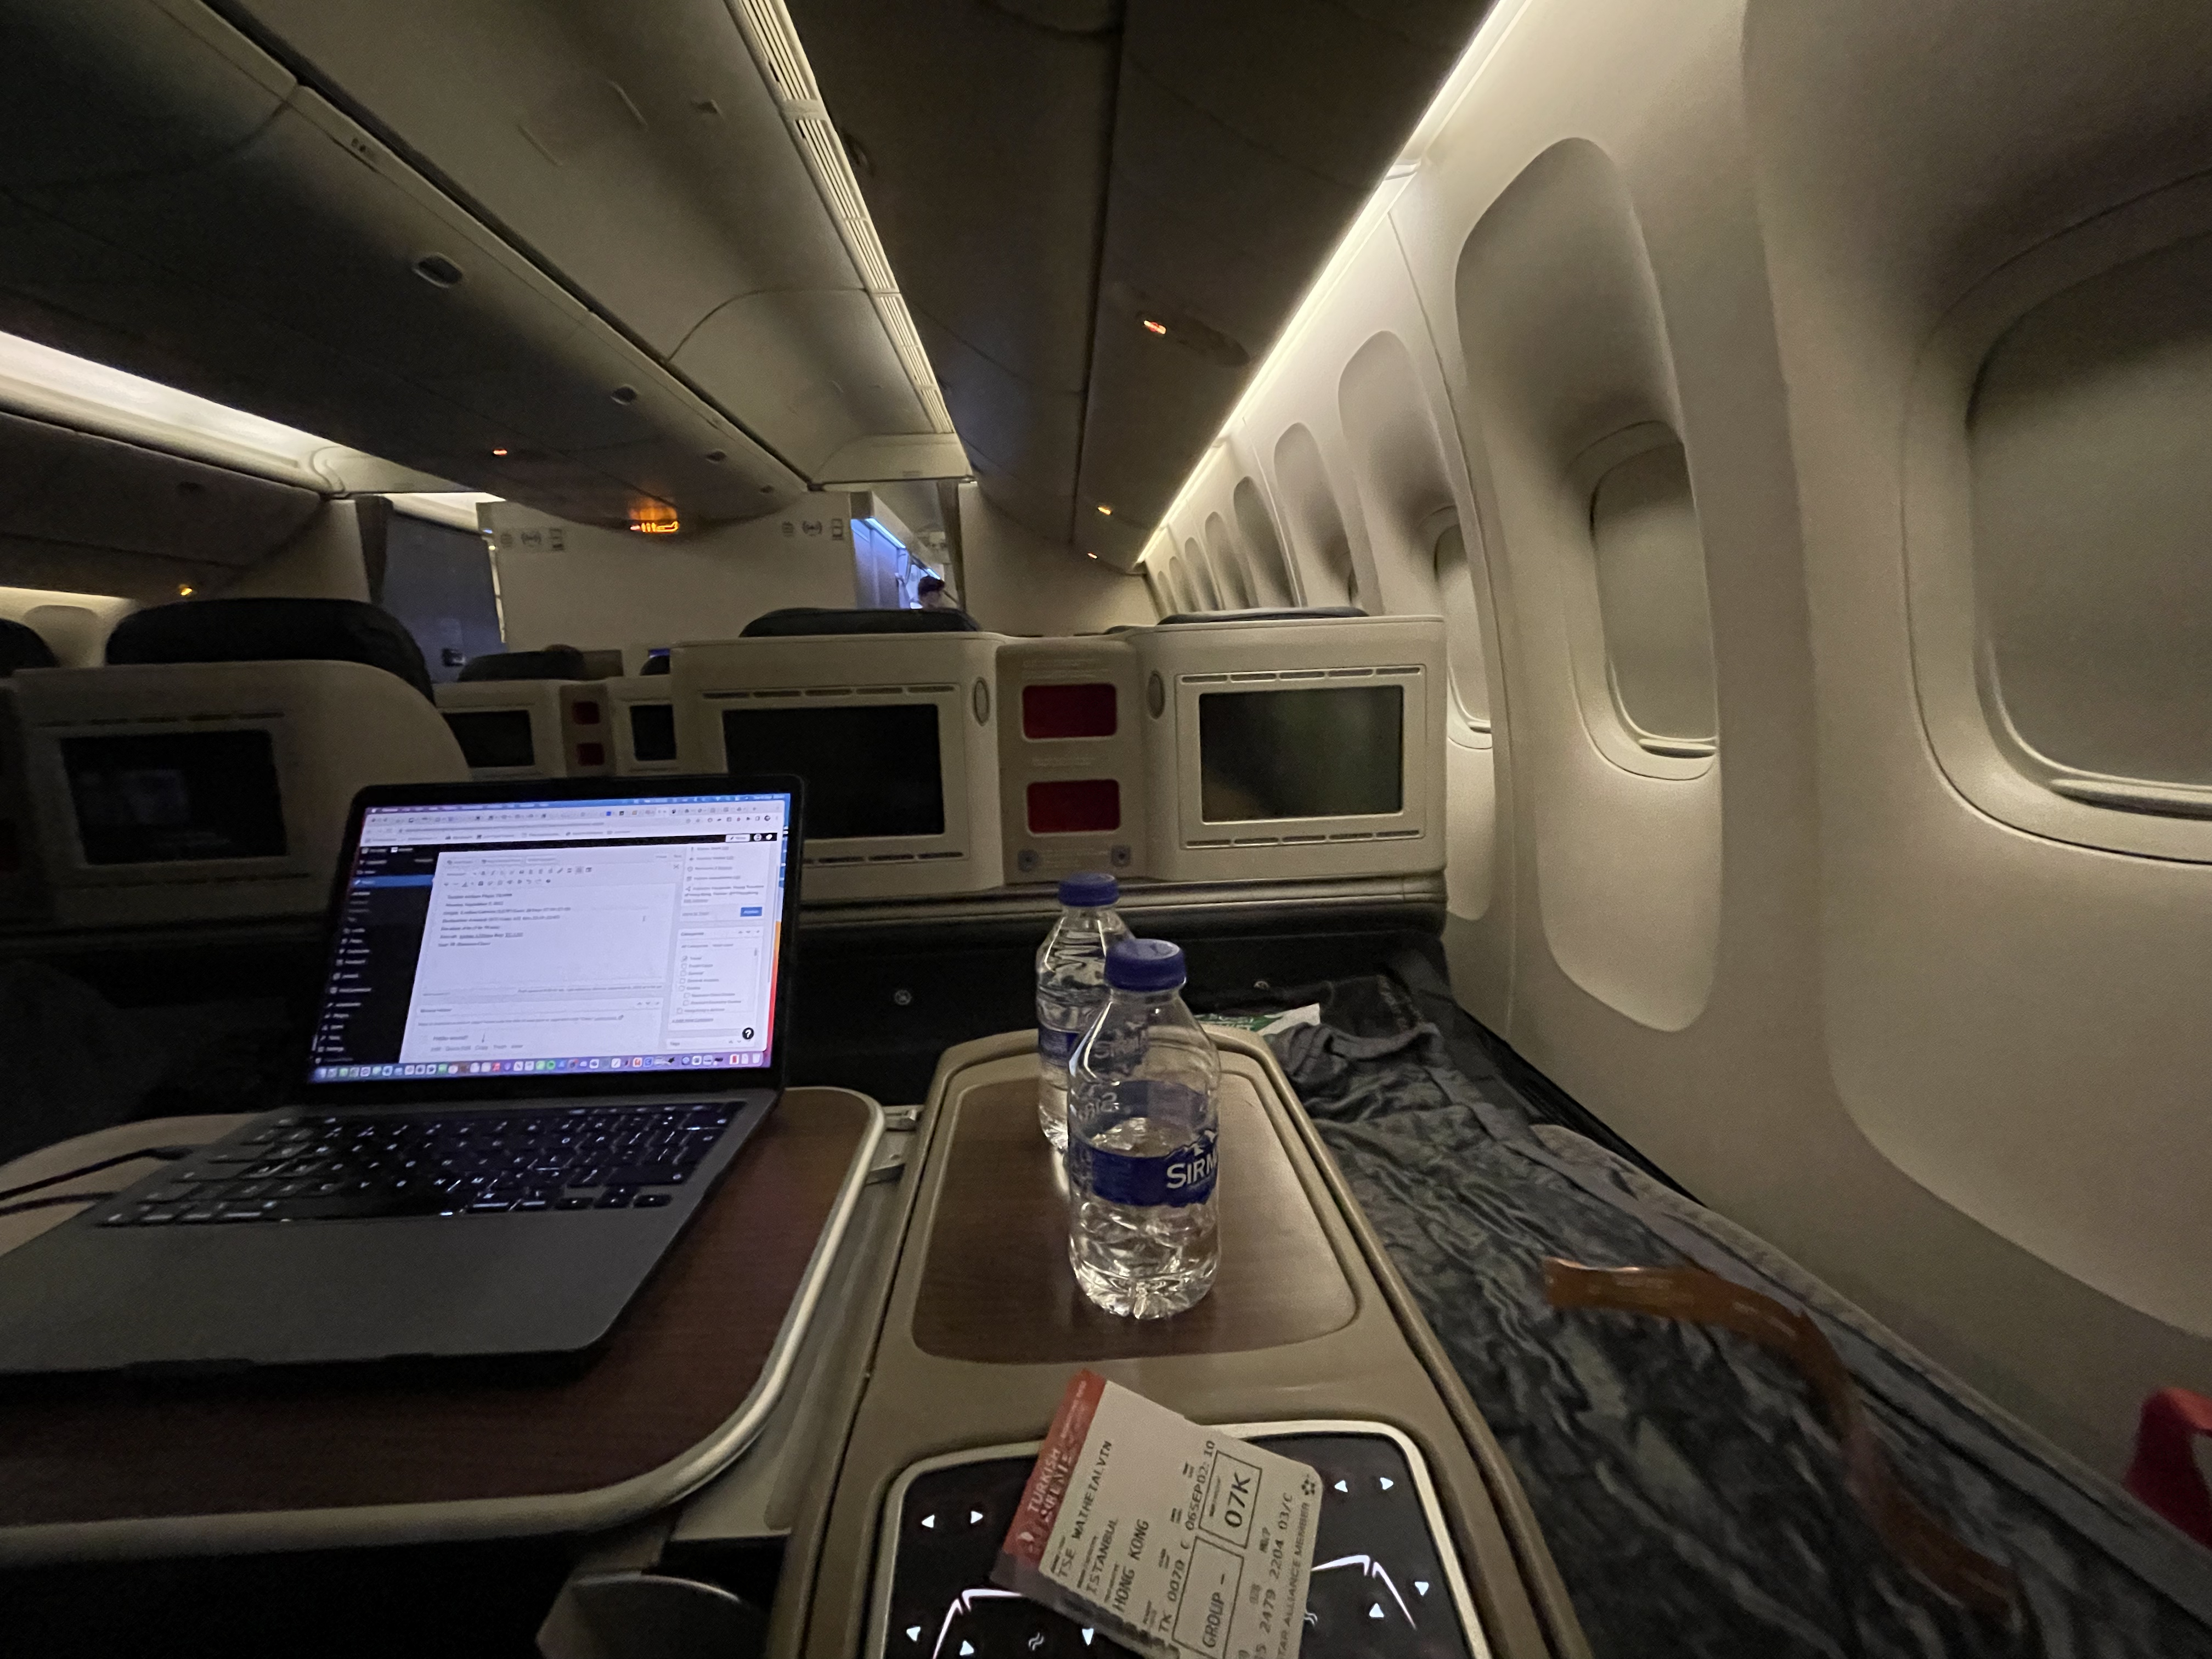 a laptop on a table in an airplane